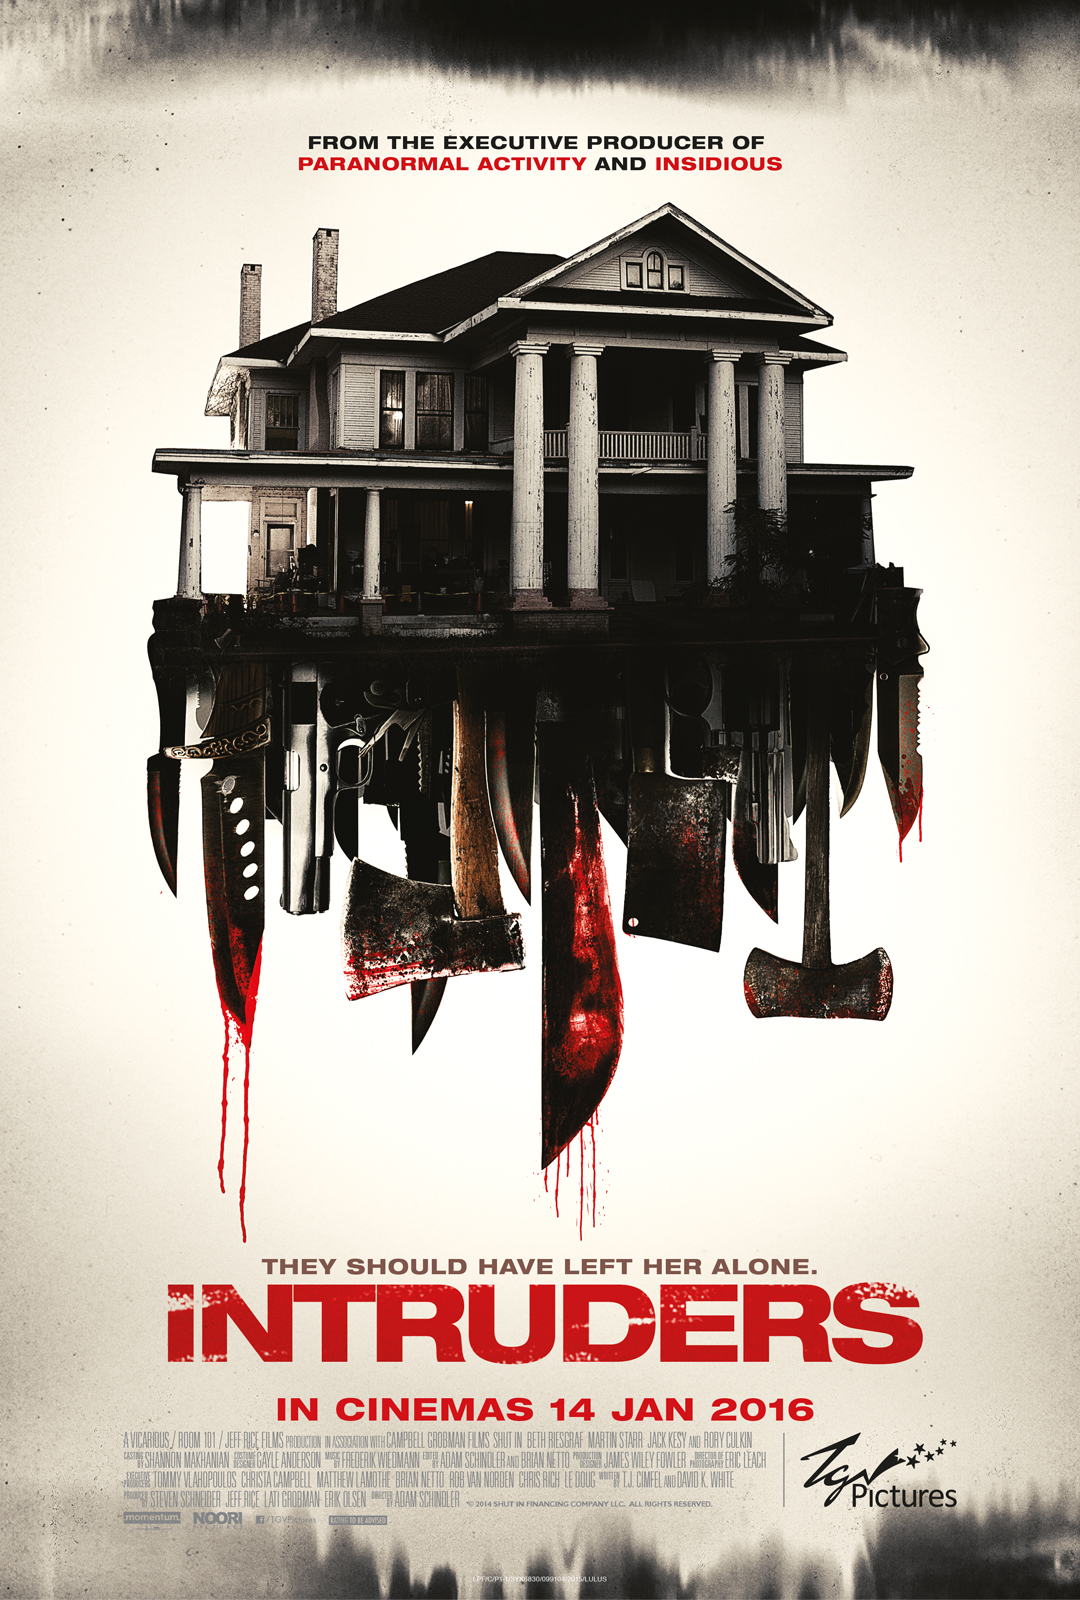 Impct Reacts to Intruders, Scary Short Horror Film